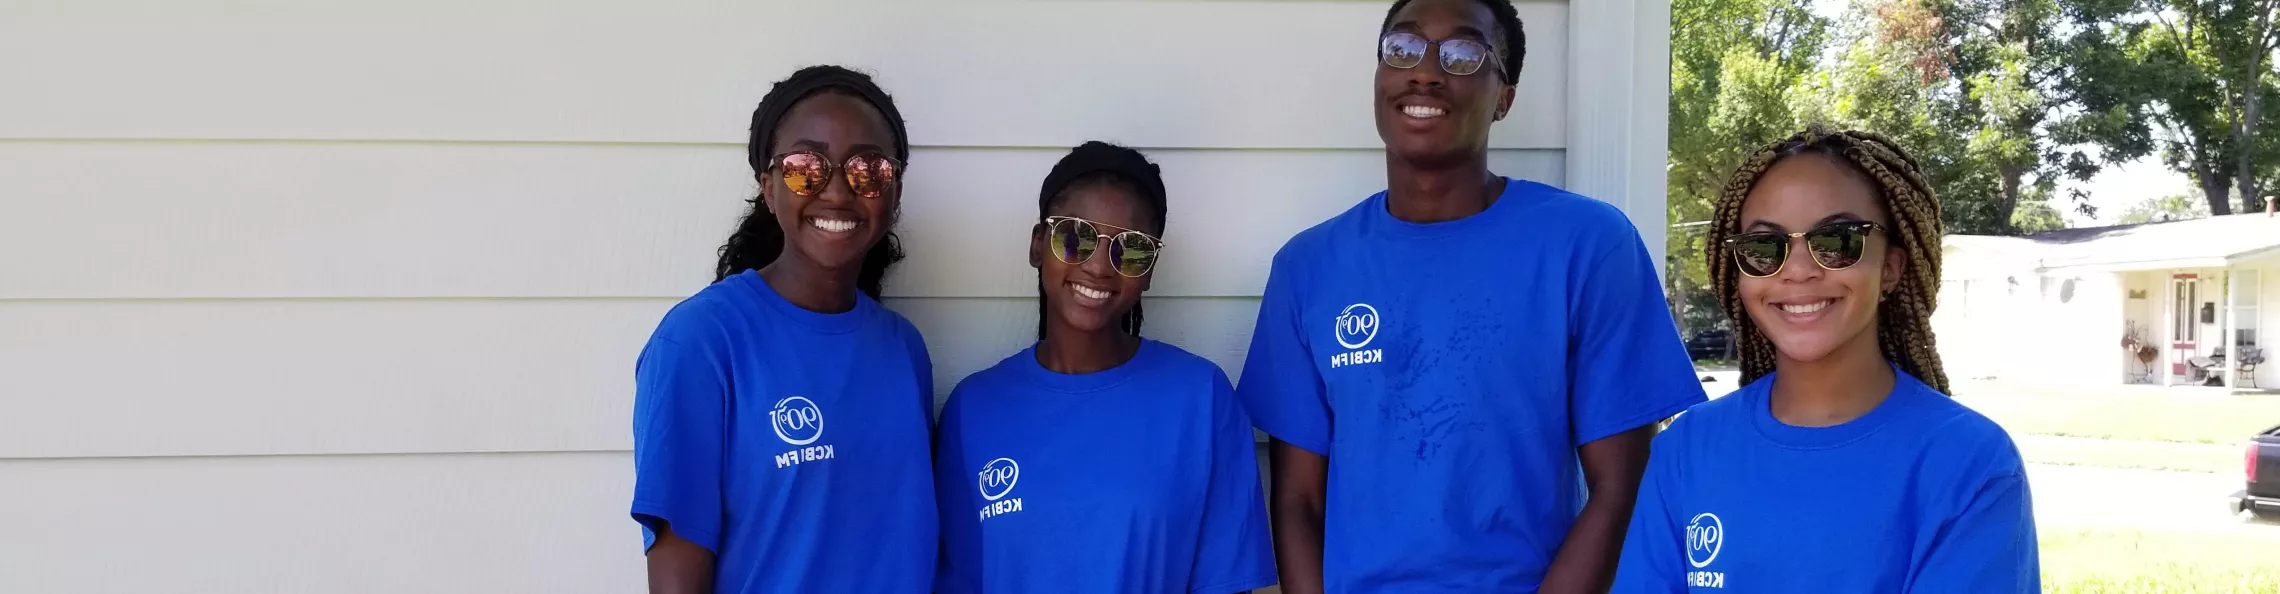 Four teens in blue shirts smiling during a community service day